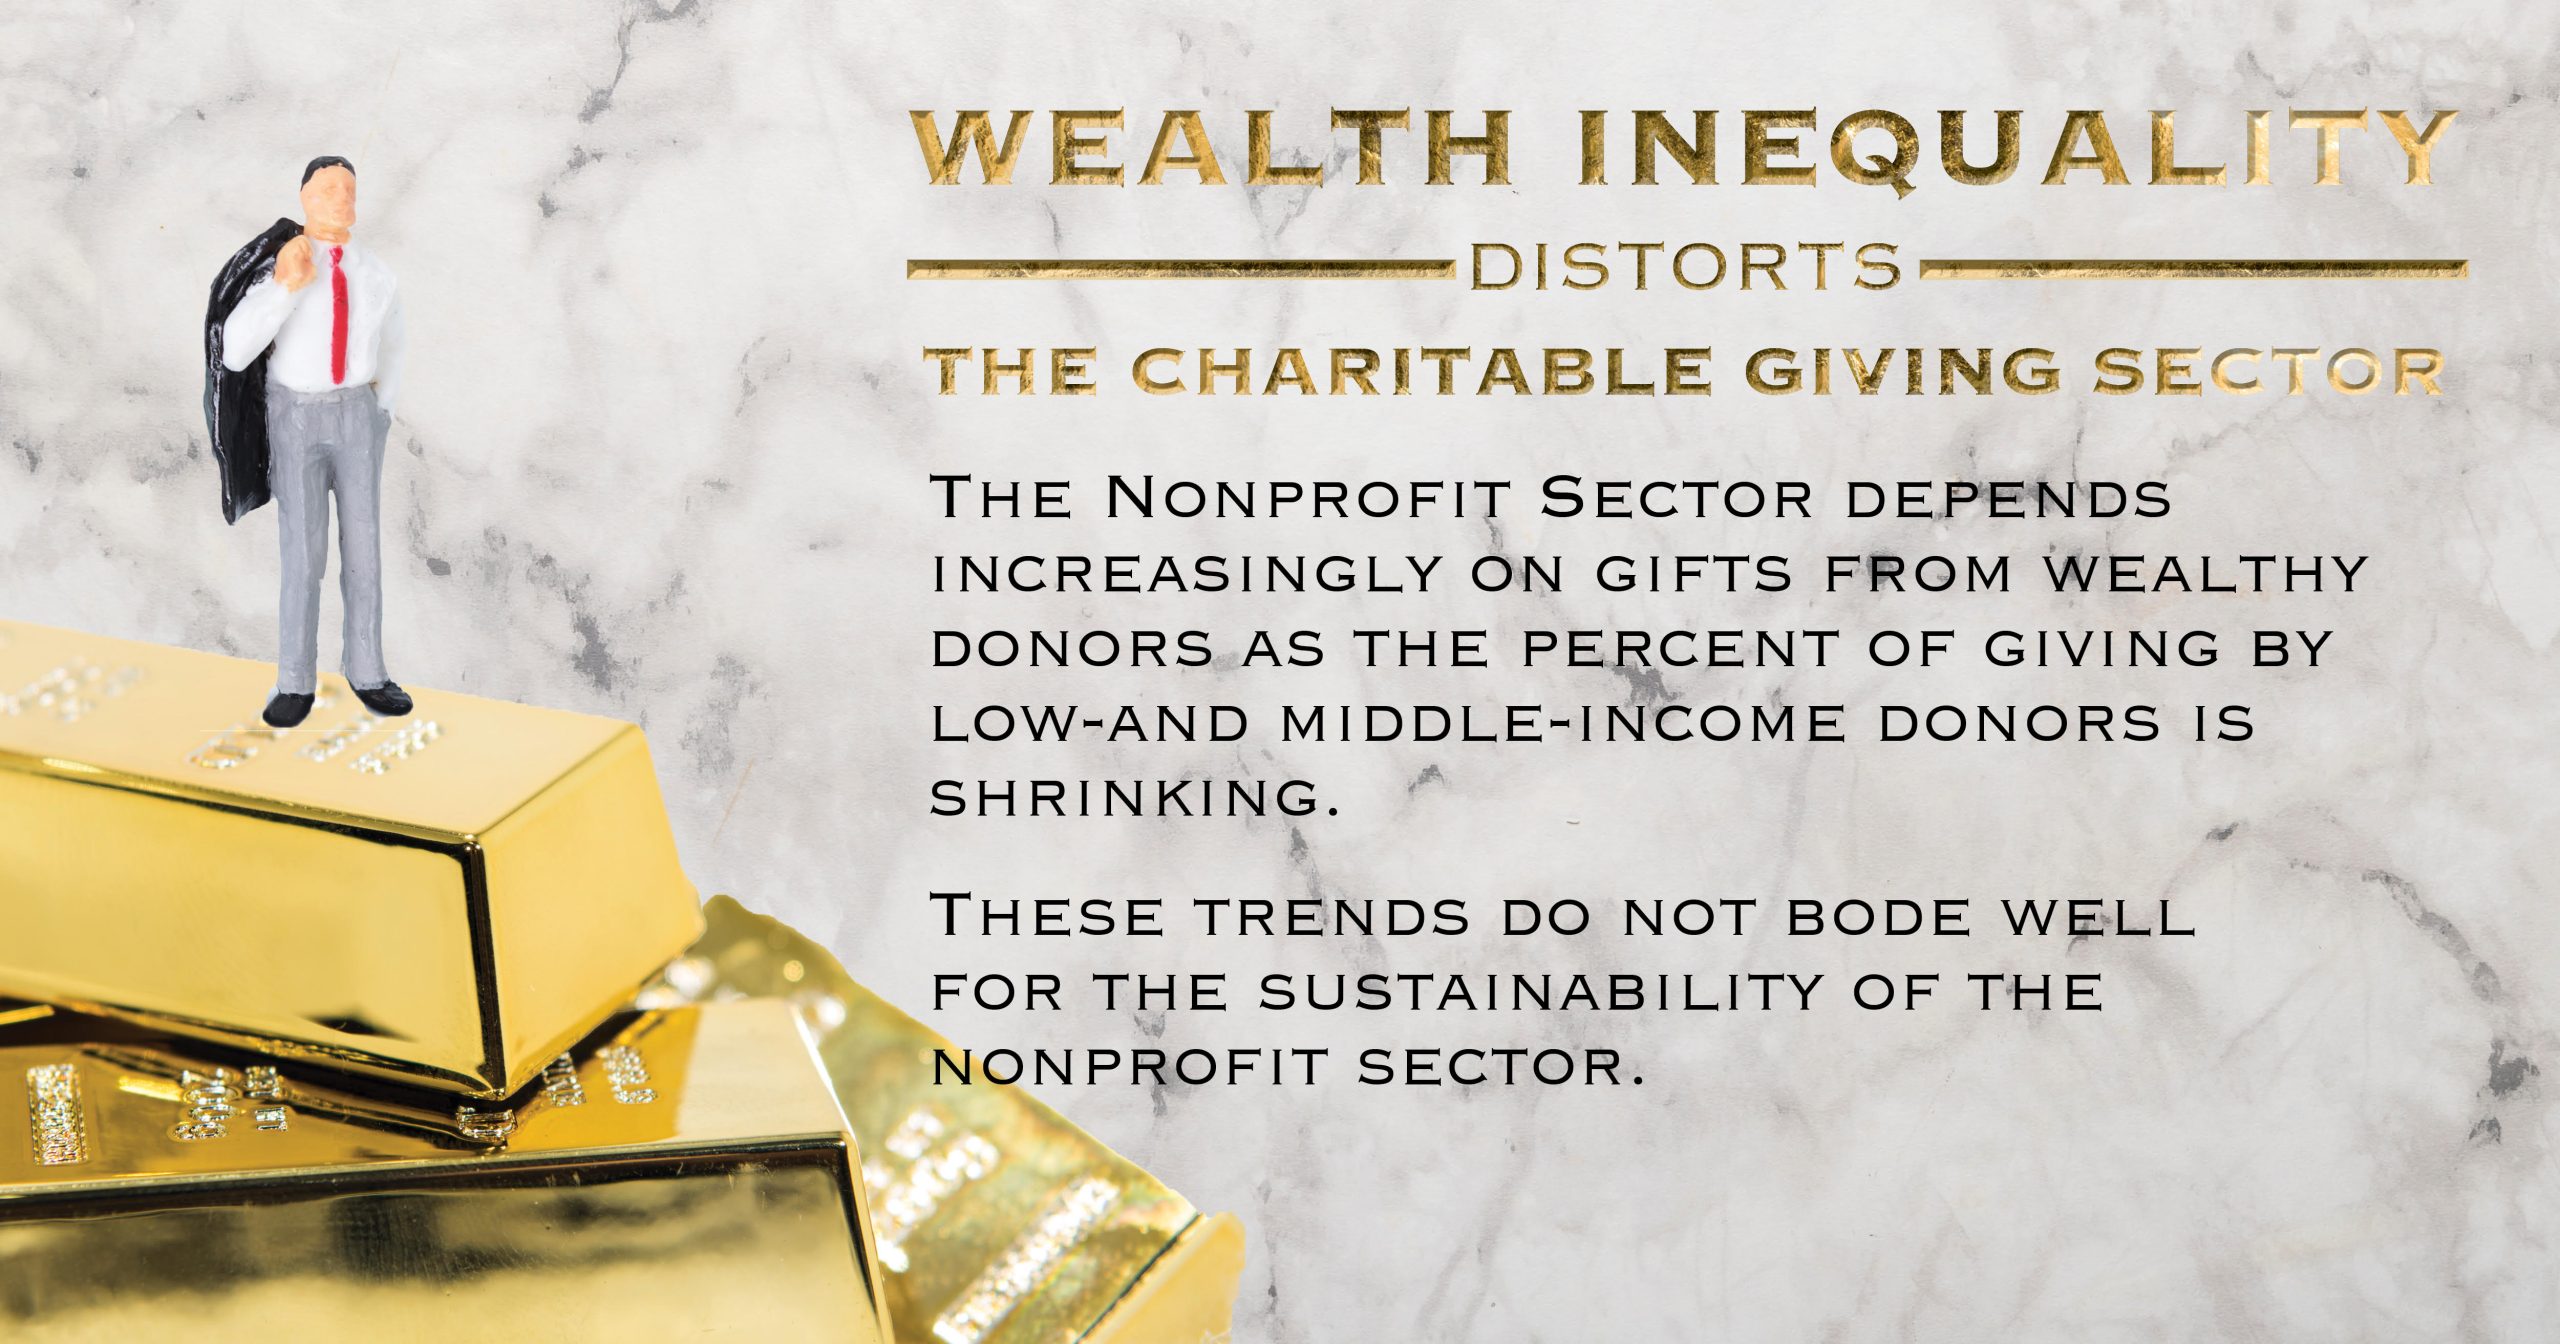 Wealth inequality distorts the charitable giving sector